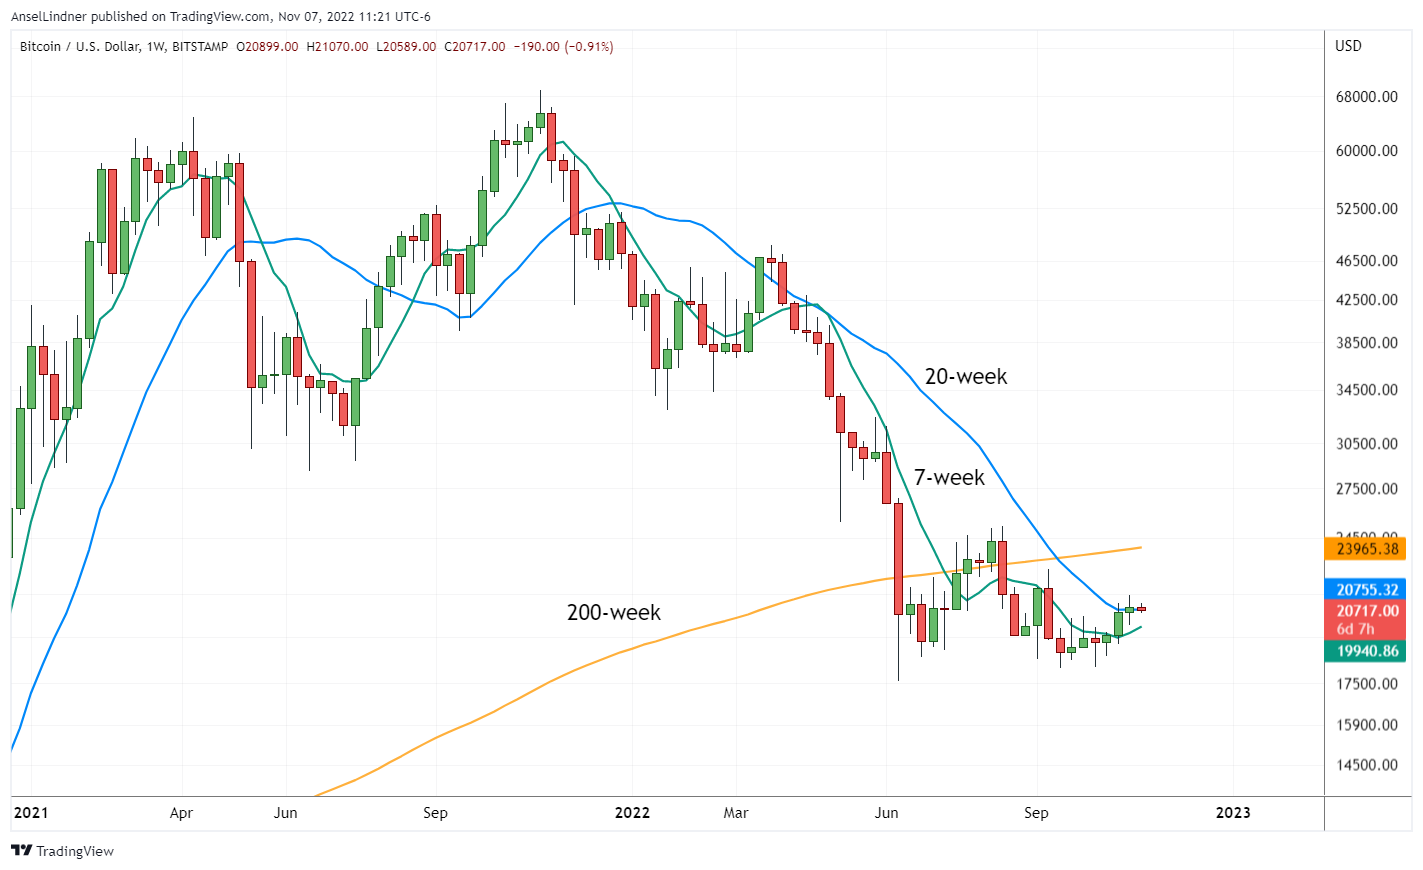 Bitcoin weekly chart with moving averages